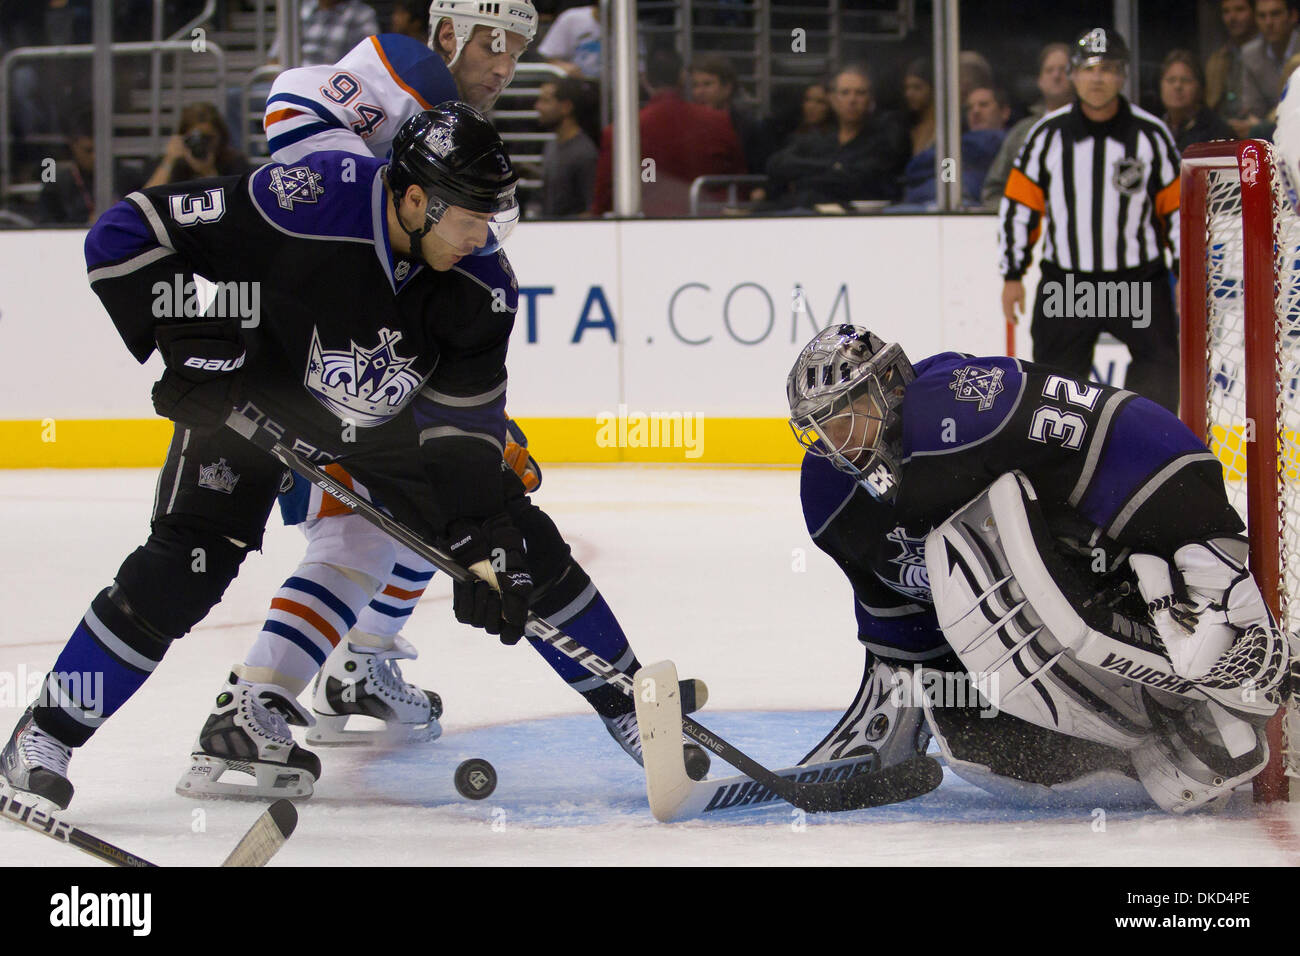 Aftermath picture of Ryan Smyth dangerous hit revealed. - HockeyFeed